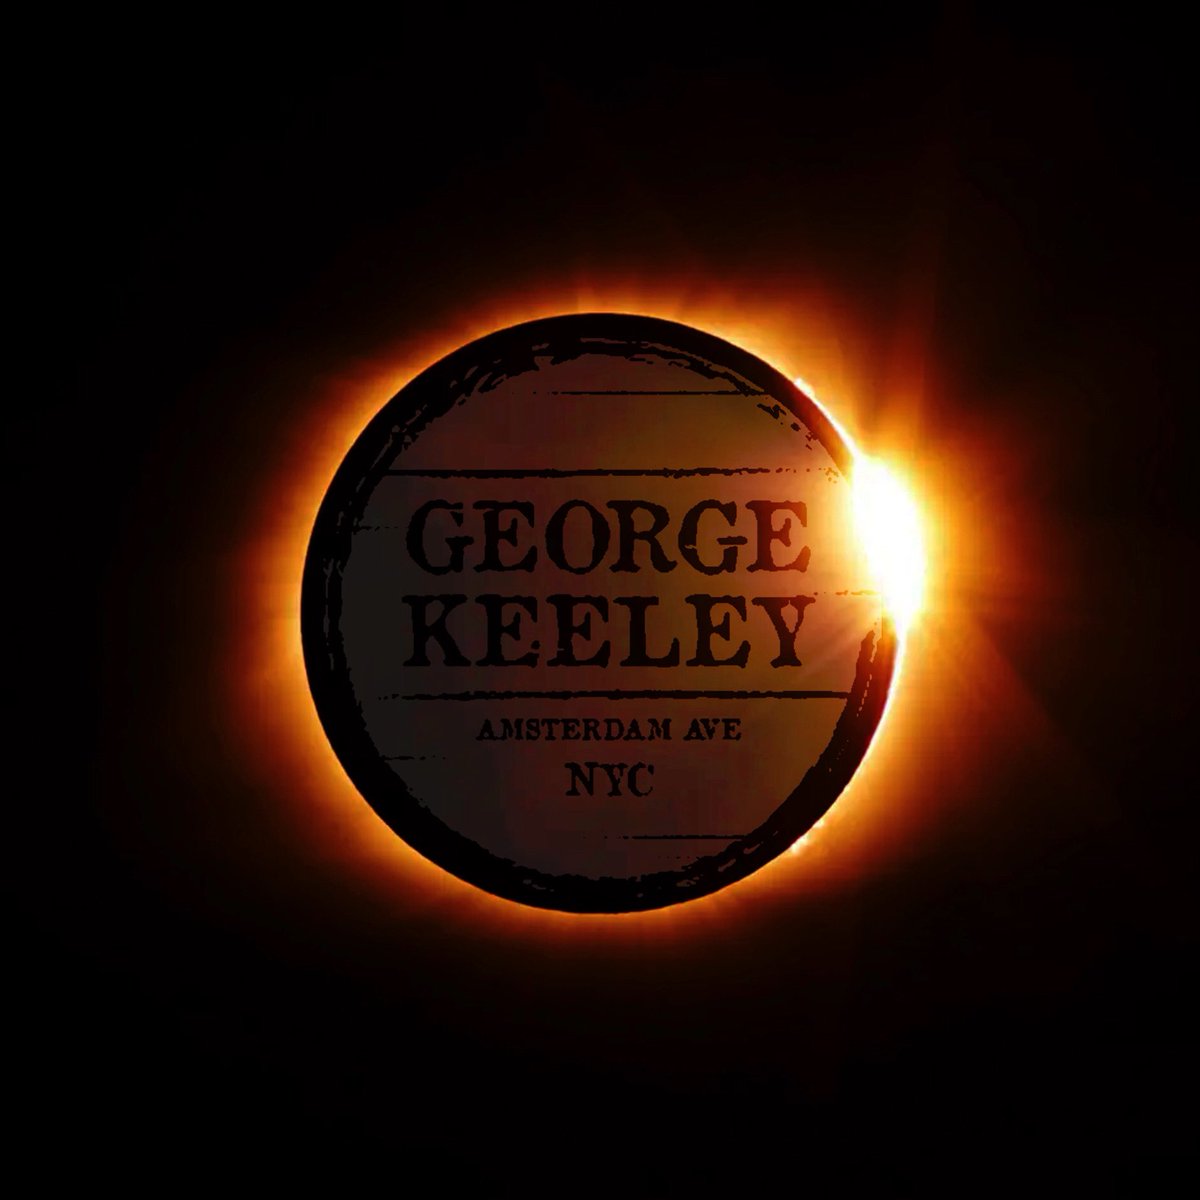 What are you doing after the solar eclipse? Come join us and stay for the men's ncaa final! 🏀🧡 #georgekeeley #gknyc #beerisgood #shutupanddrink #drinkamongstfriends #uwsnyc #upperwestsideeats #cheers #pubfood #drinkrealbeer #beerandbasketball #pubgrub #ncaa #marchmadness